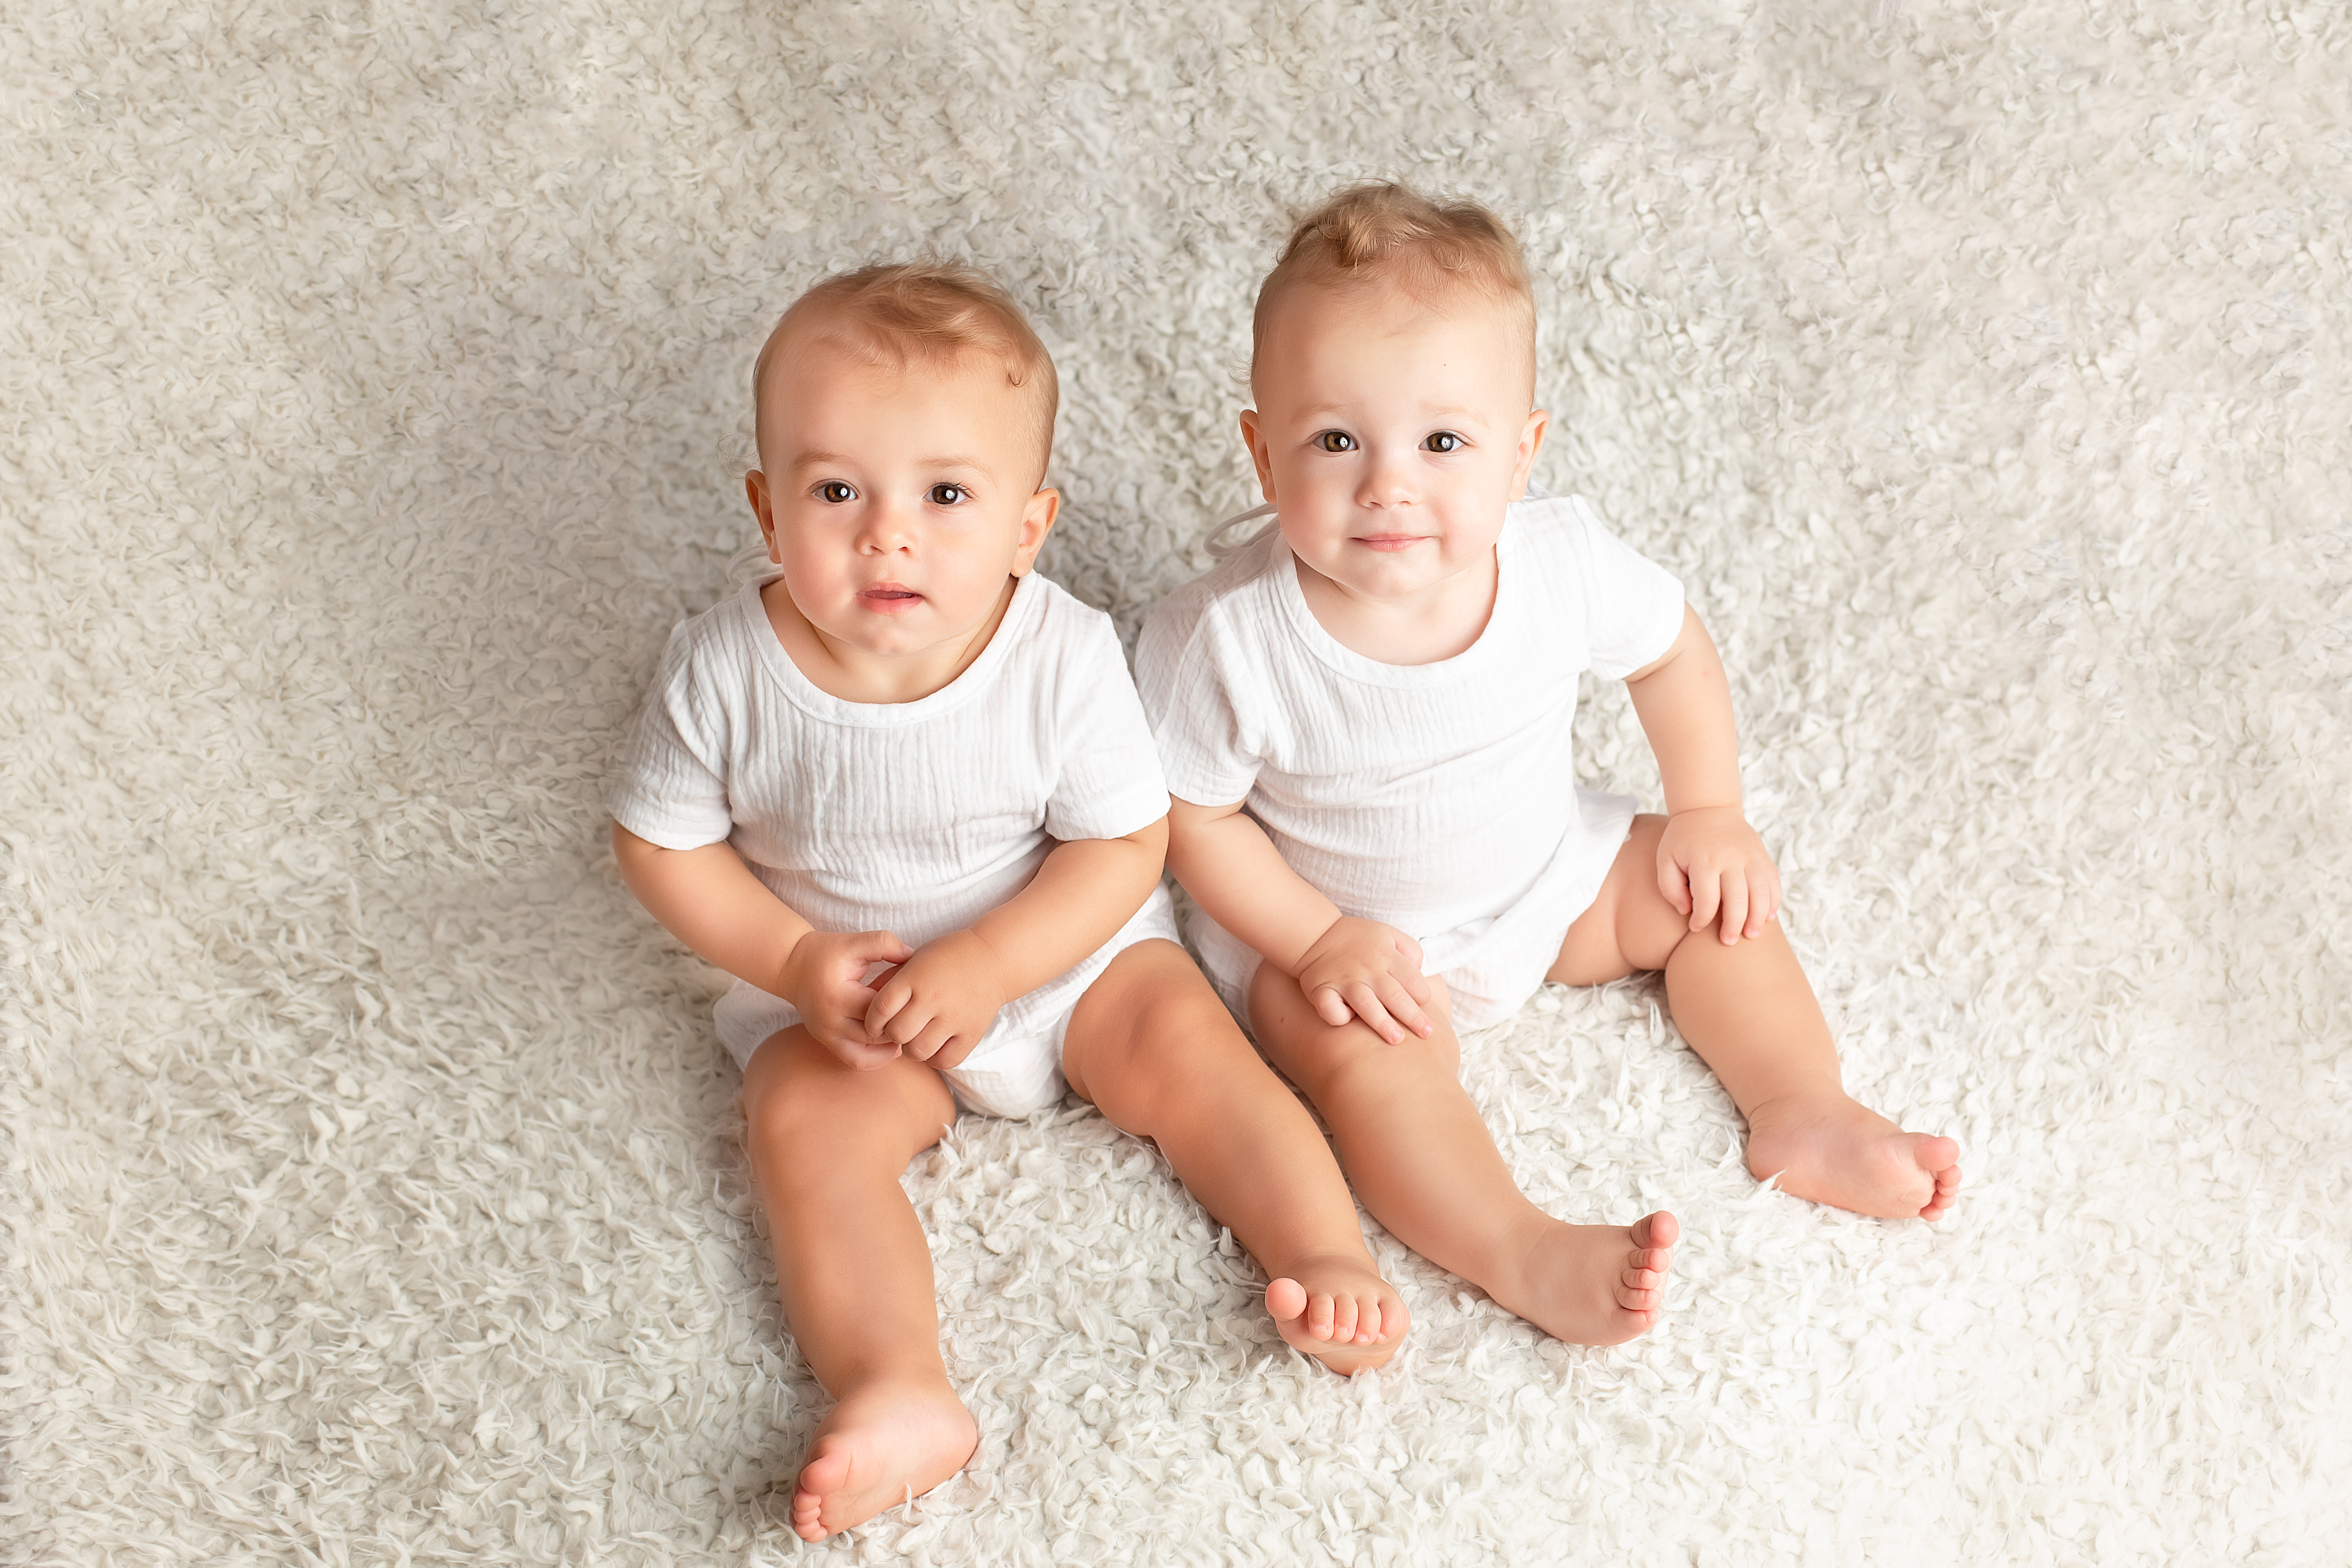 A pair of twins | Source: Shutterstock